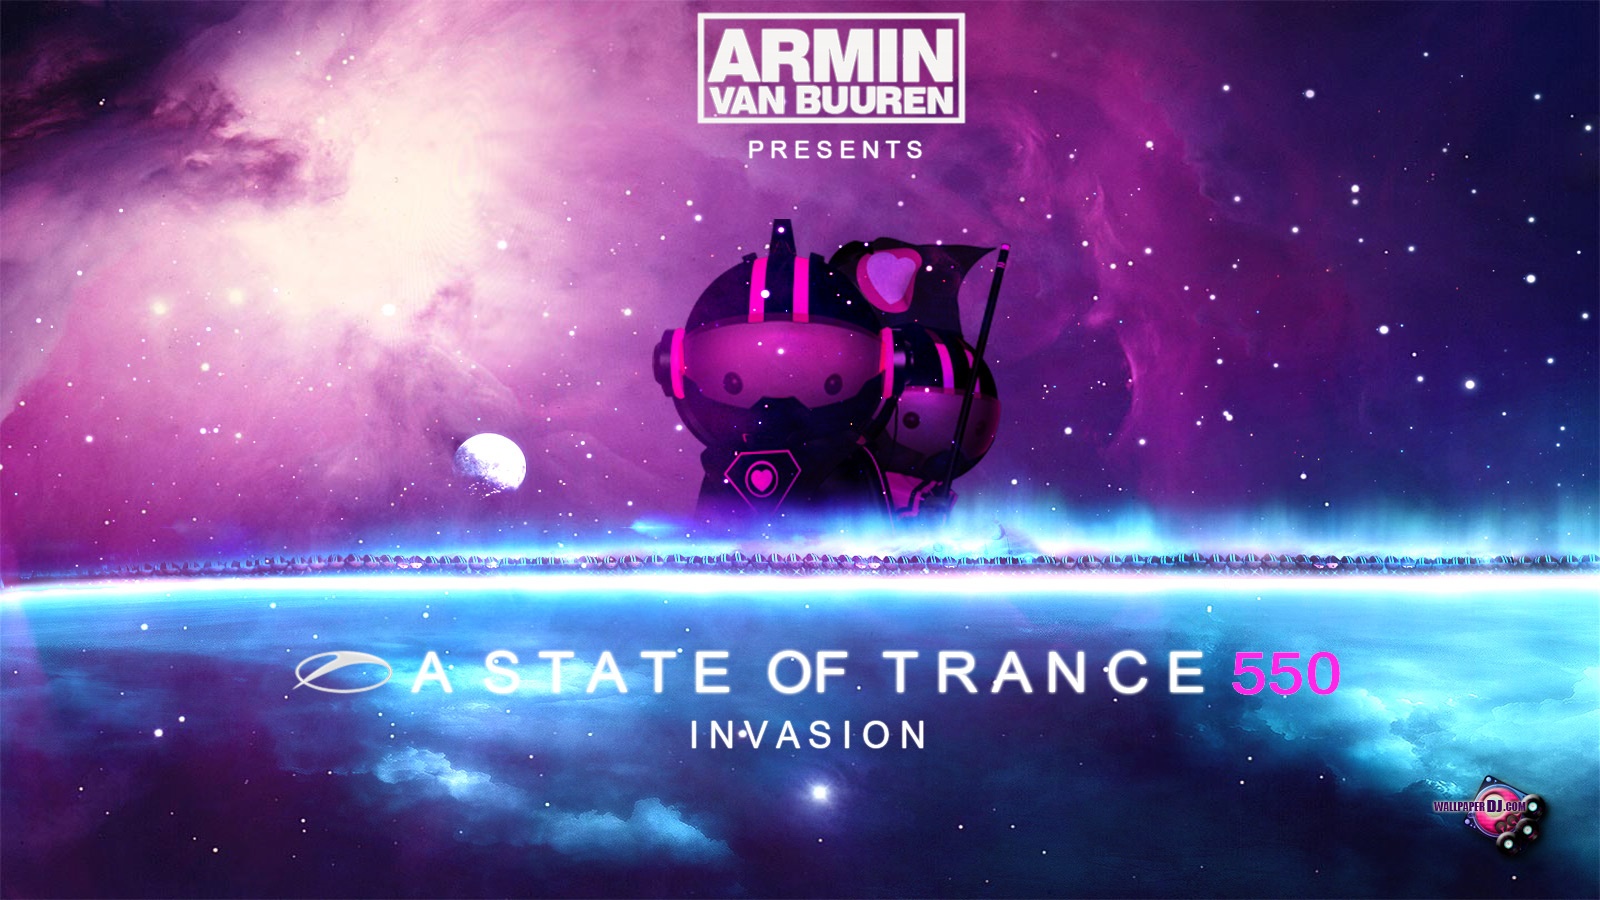 Of Sound London A State Trance With Armin Van Buuren